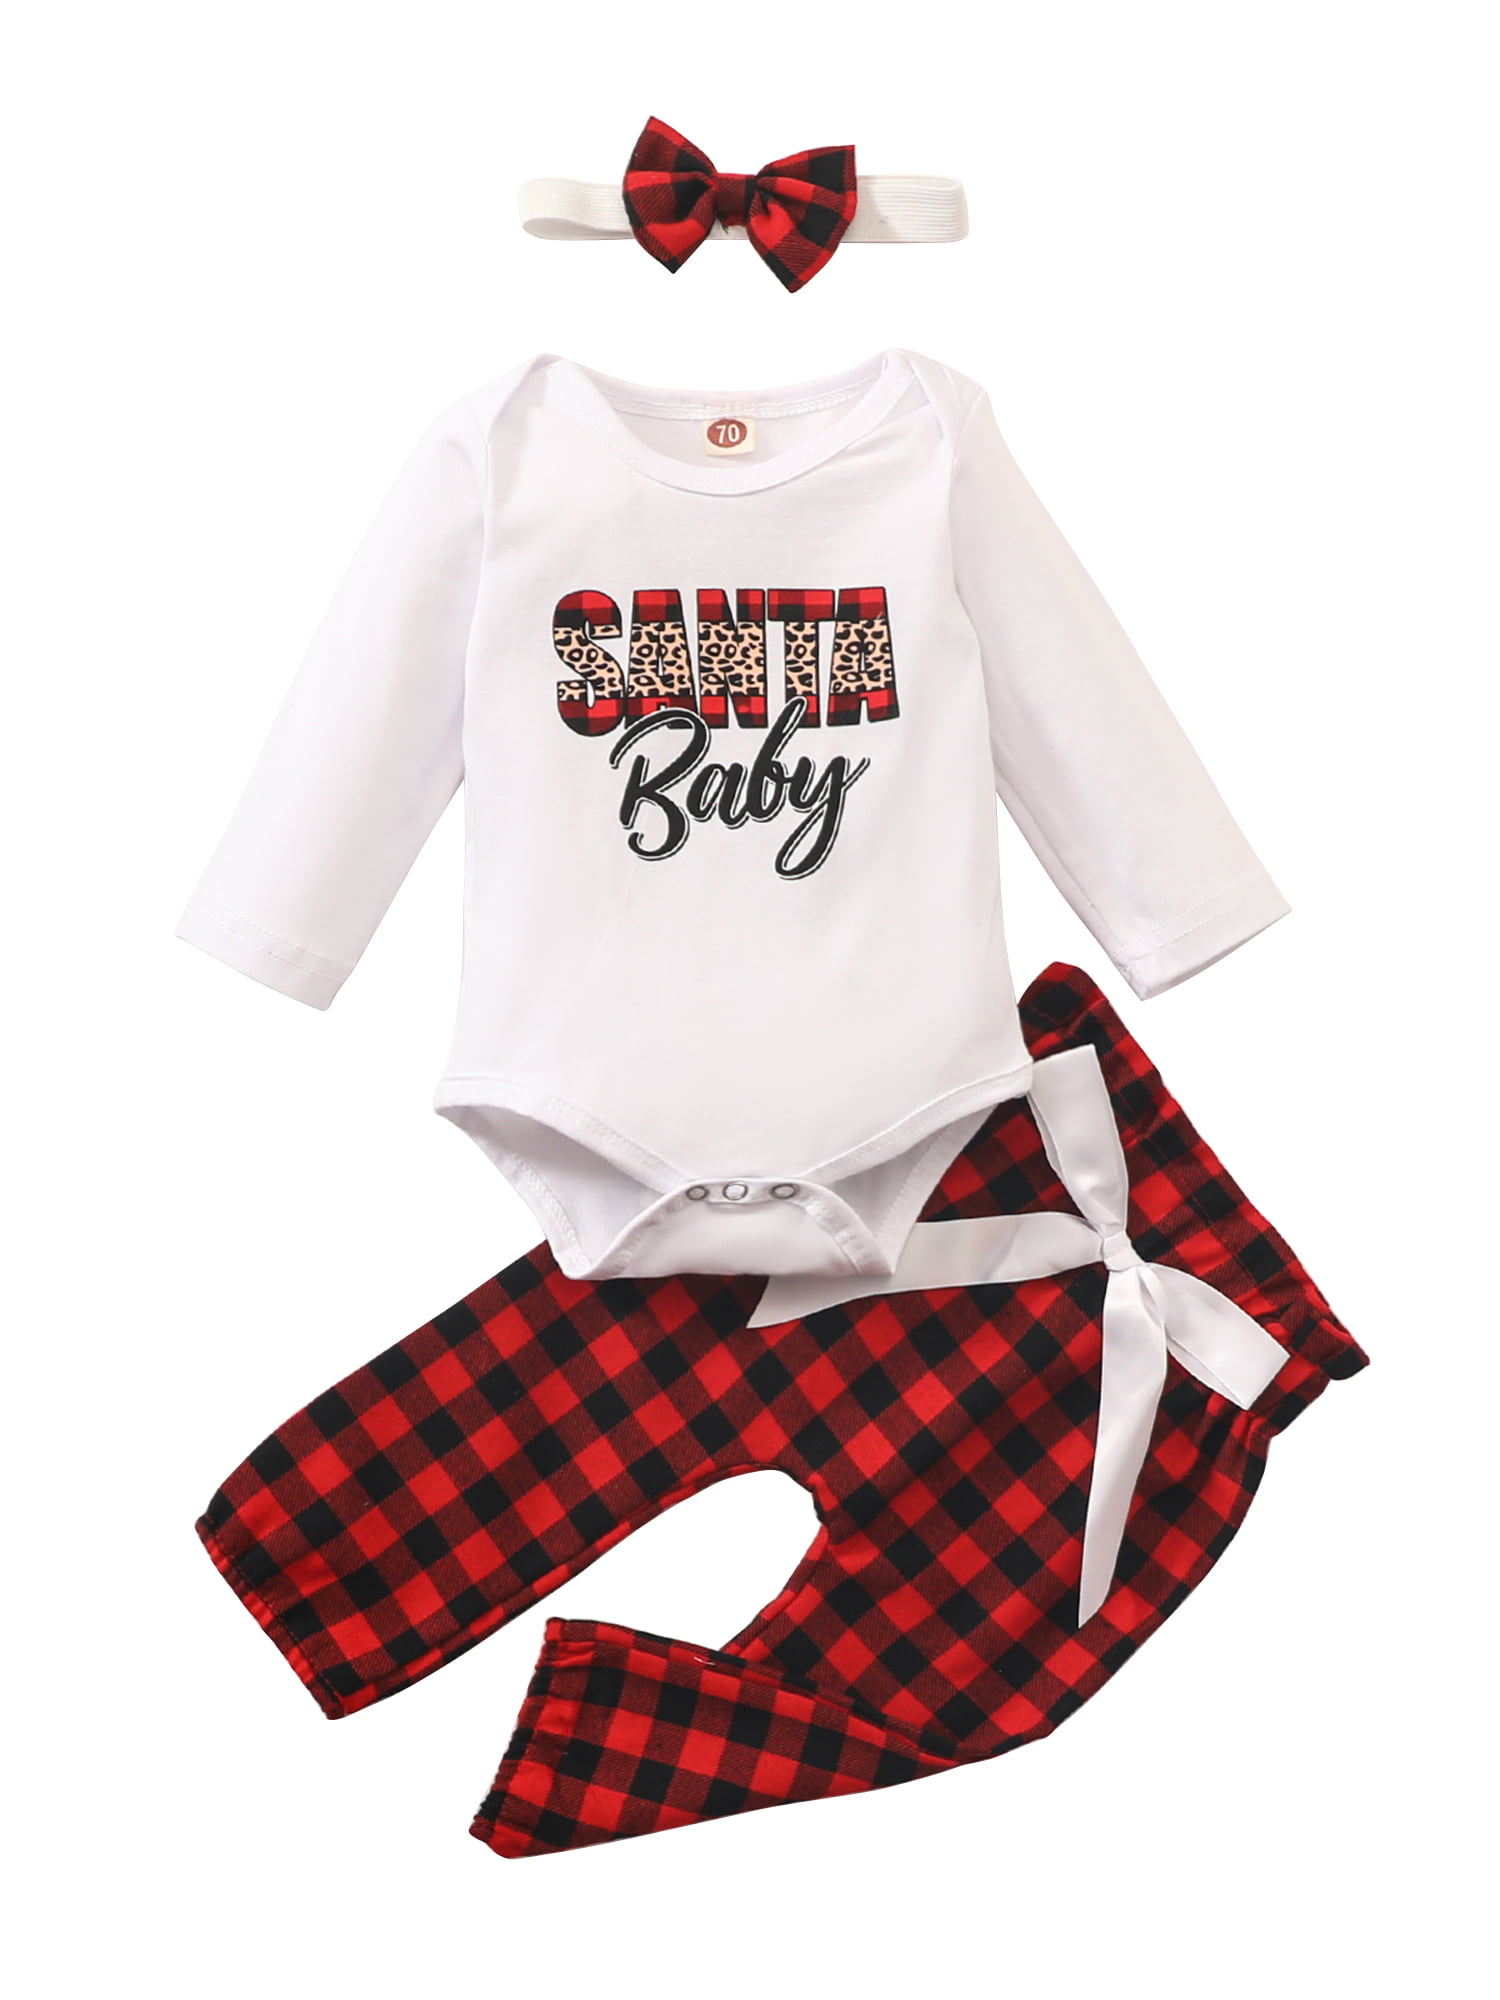 Details about   Newborn Baby Girl Christmas Outfit Romper Tops Plaid Tutu Pants Headband Clothes 